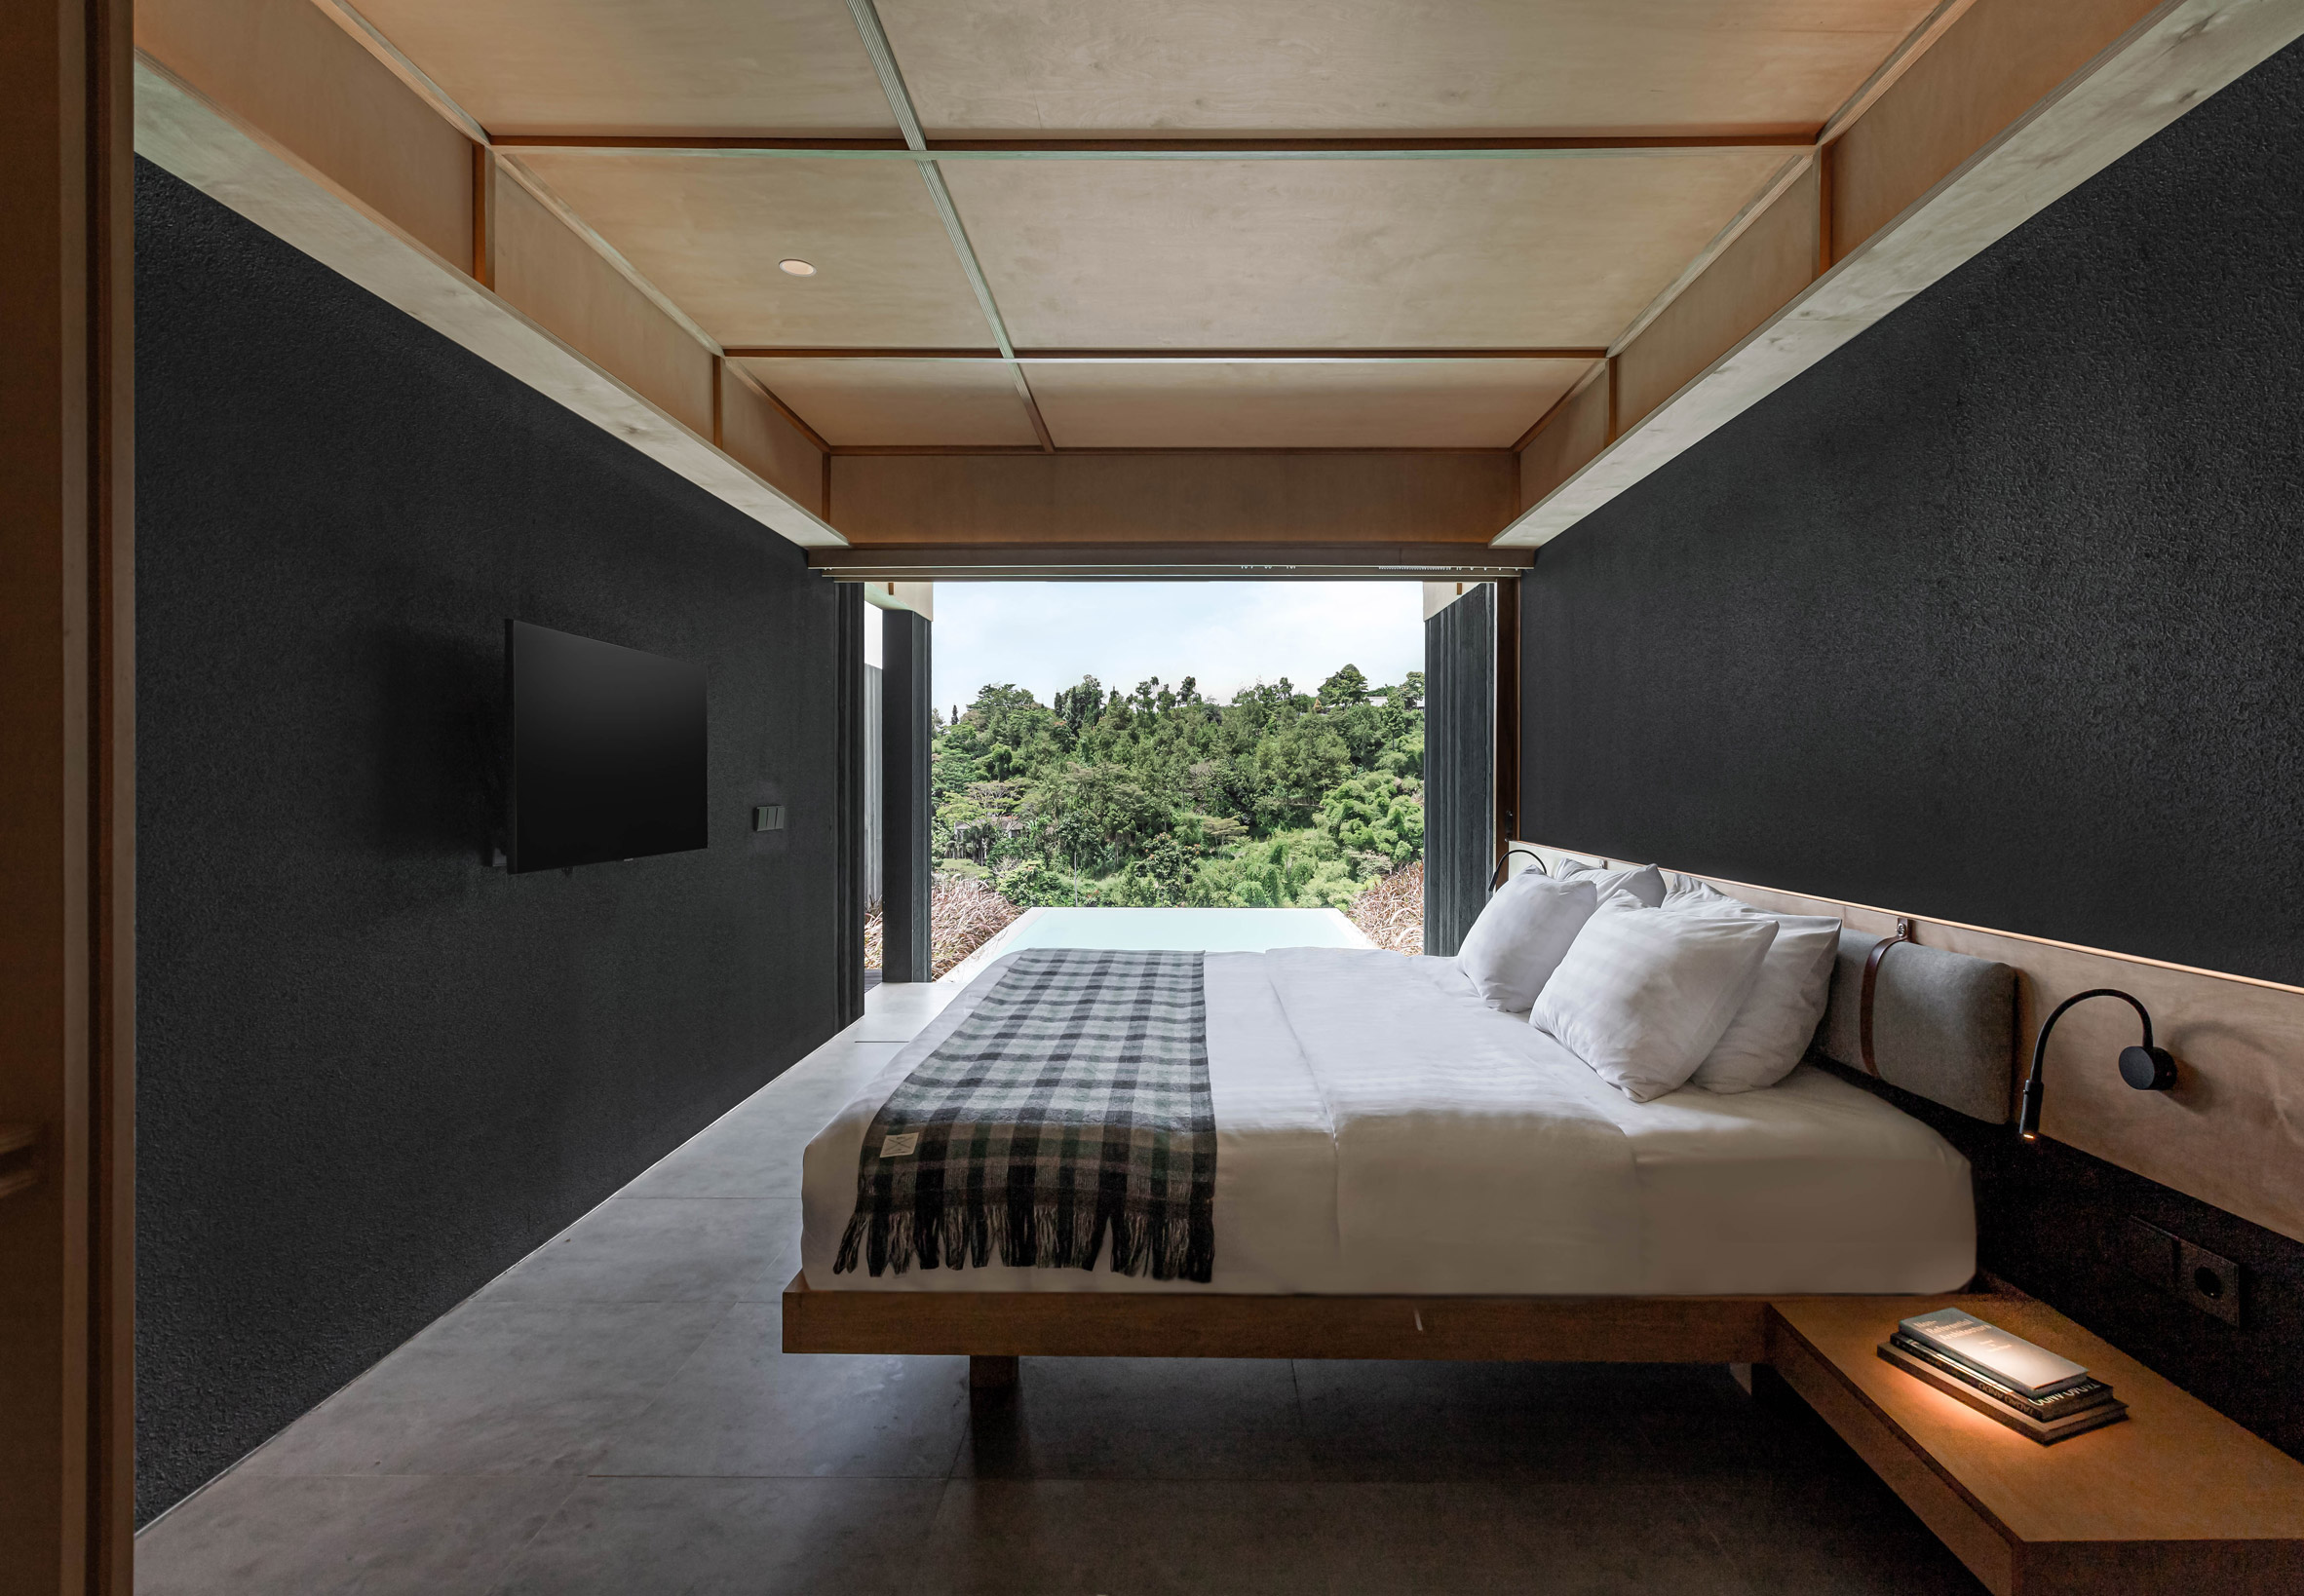 Photo of a bedroom in an Indonesian villa